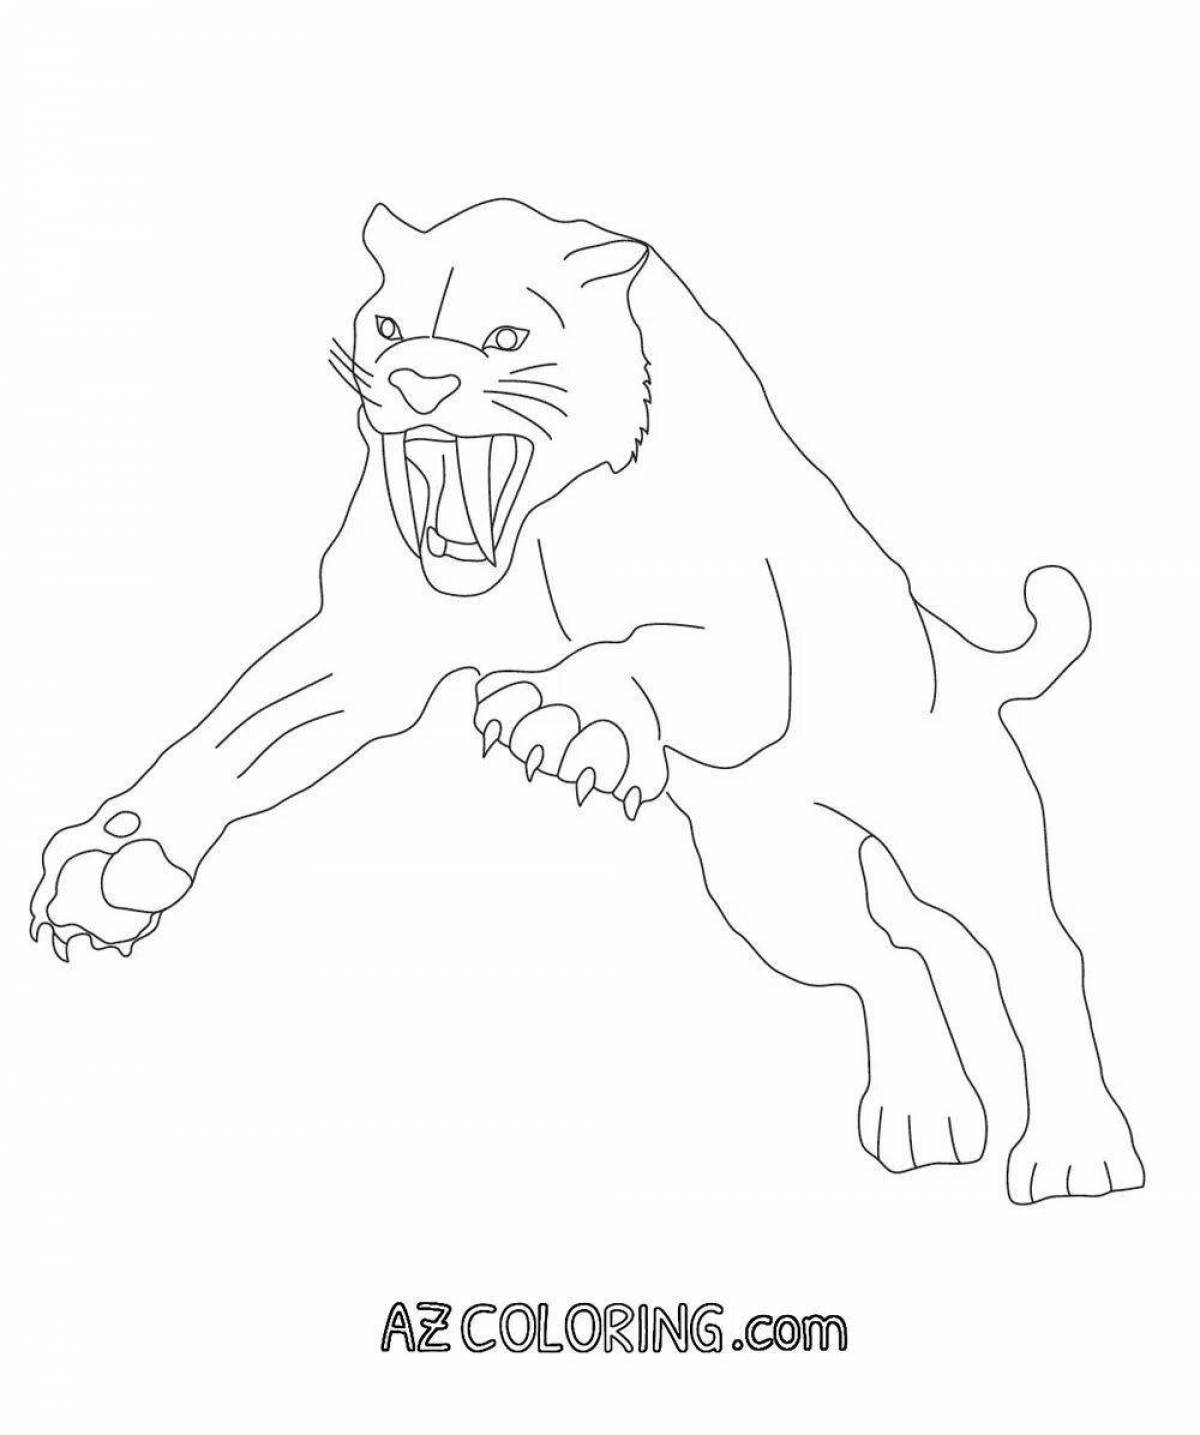 Attracting saber-toothed tiger coloring pages for kids